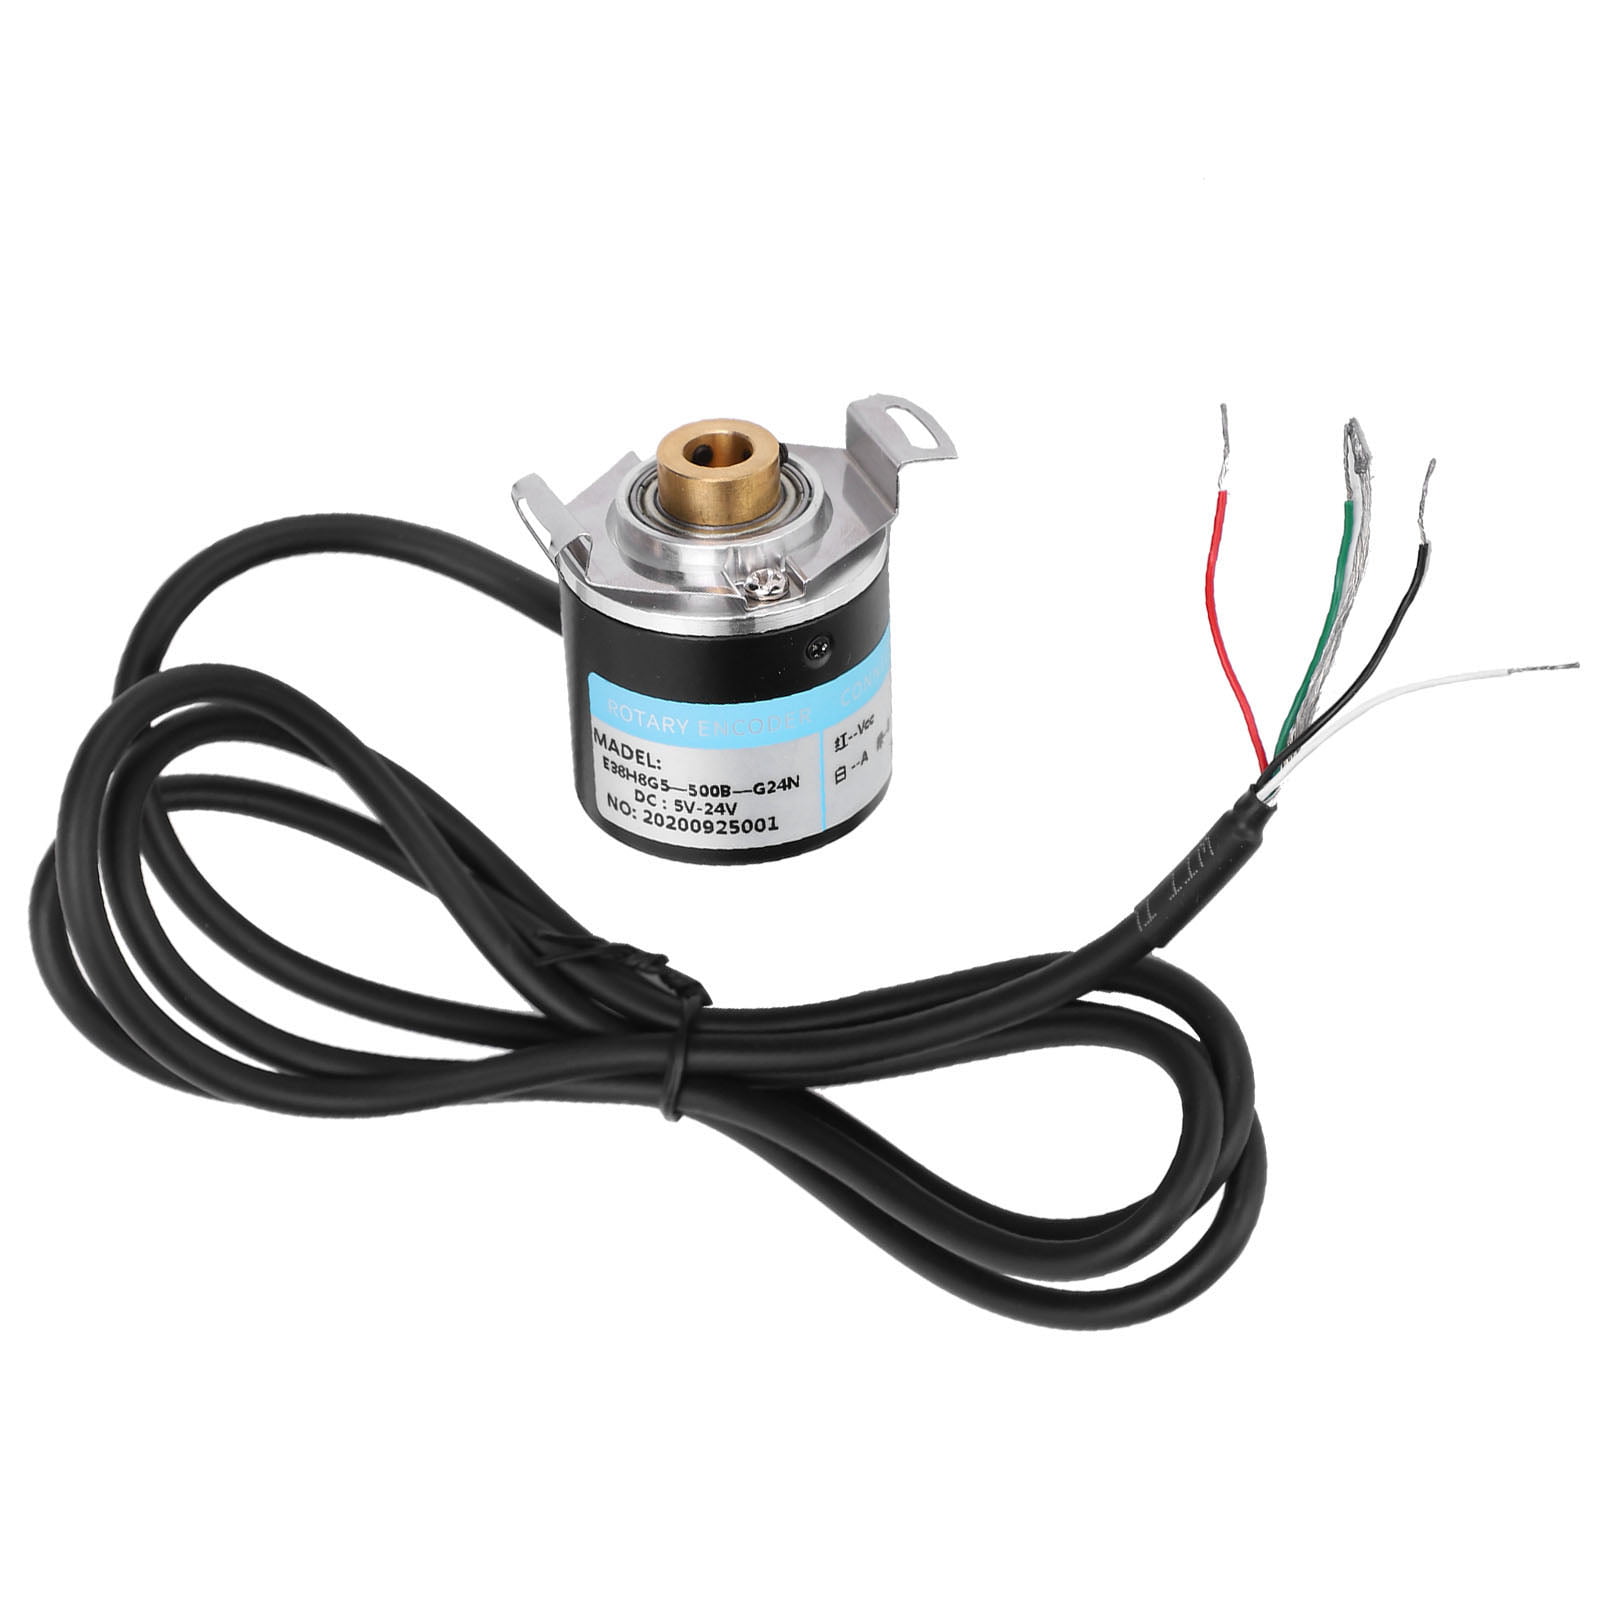 360B Small Encoder Hollow Shaft AB 2‑Phase for Industrial Automation Parts 3000‑6000 RPM DC5-24V with 3 Screws and 6 Washers 